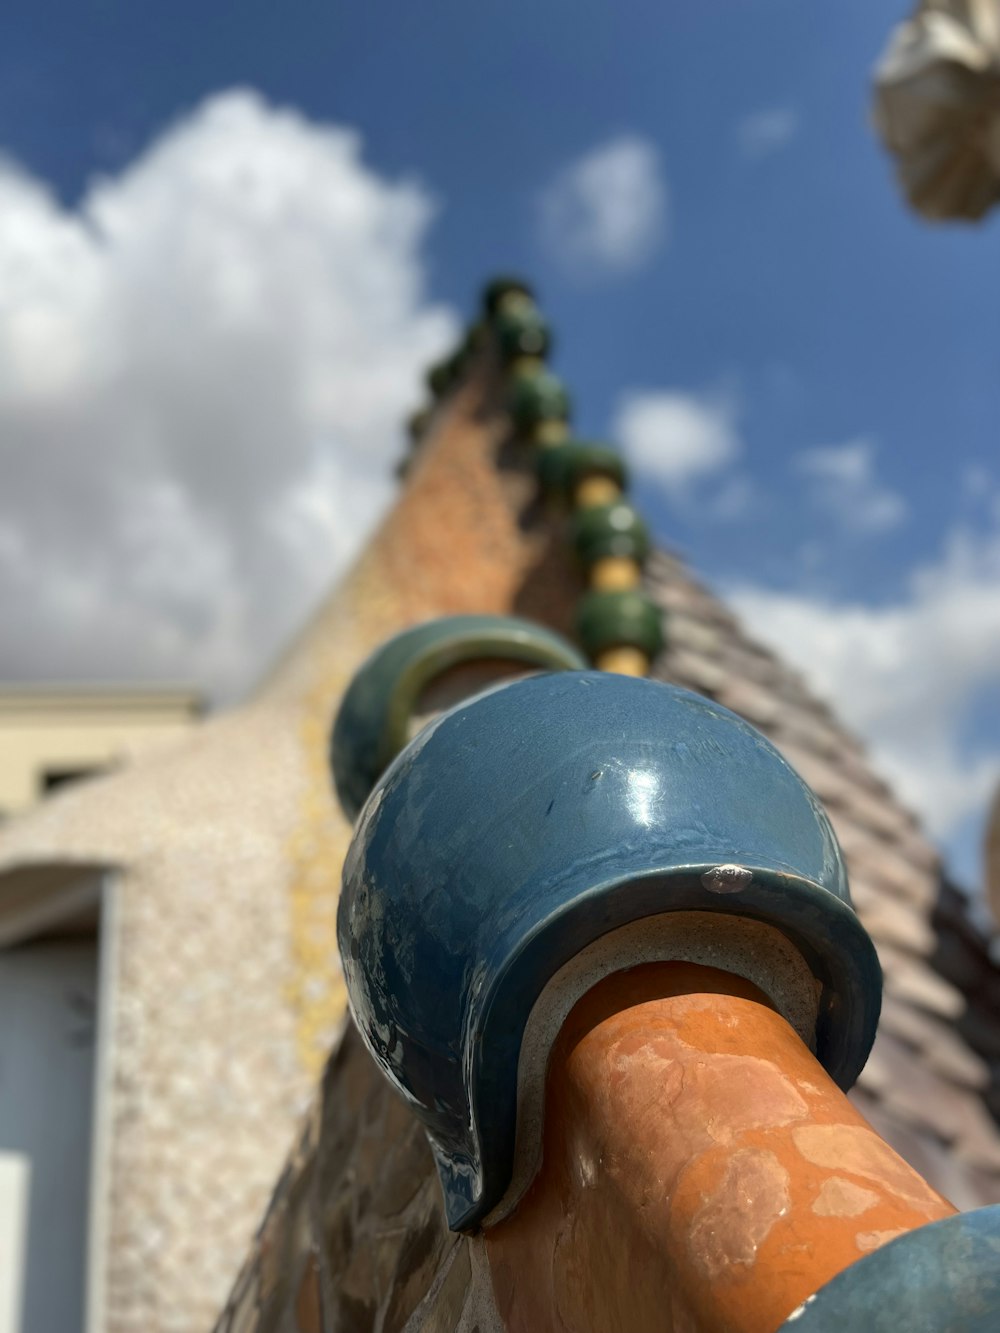 a close-up of a bell